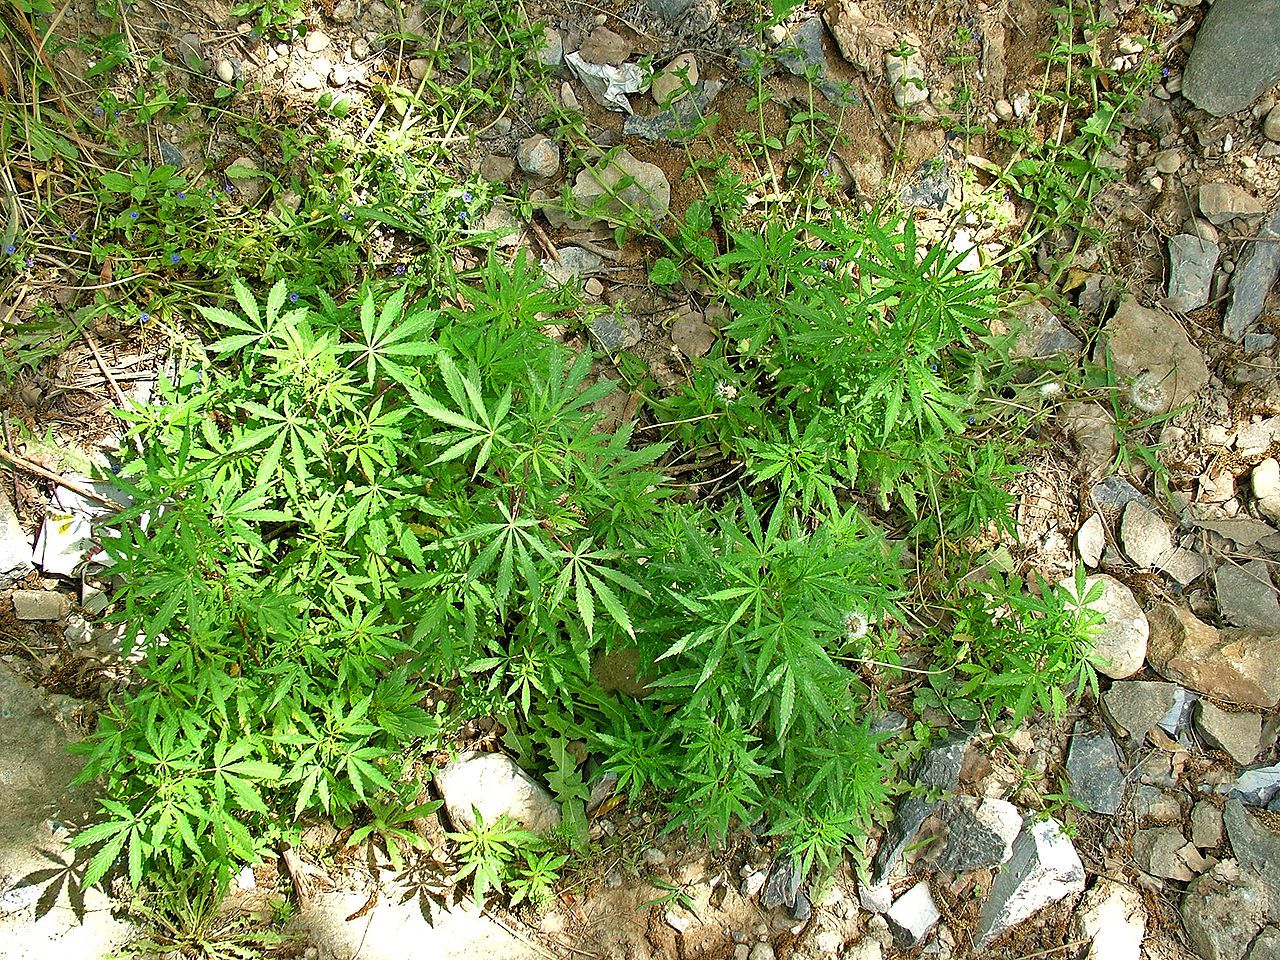 In Bhutan, pot plants are so common that they are seen as a pest. They’re even said to be more common than actual grass in the country.